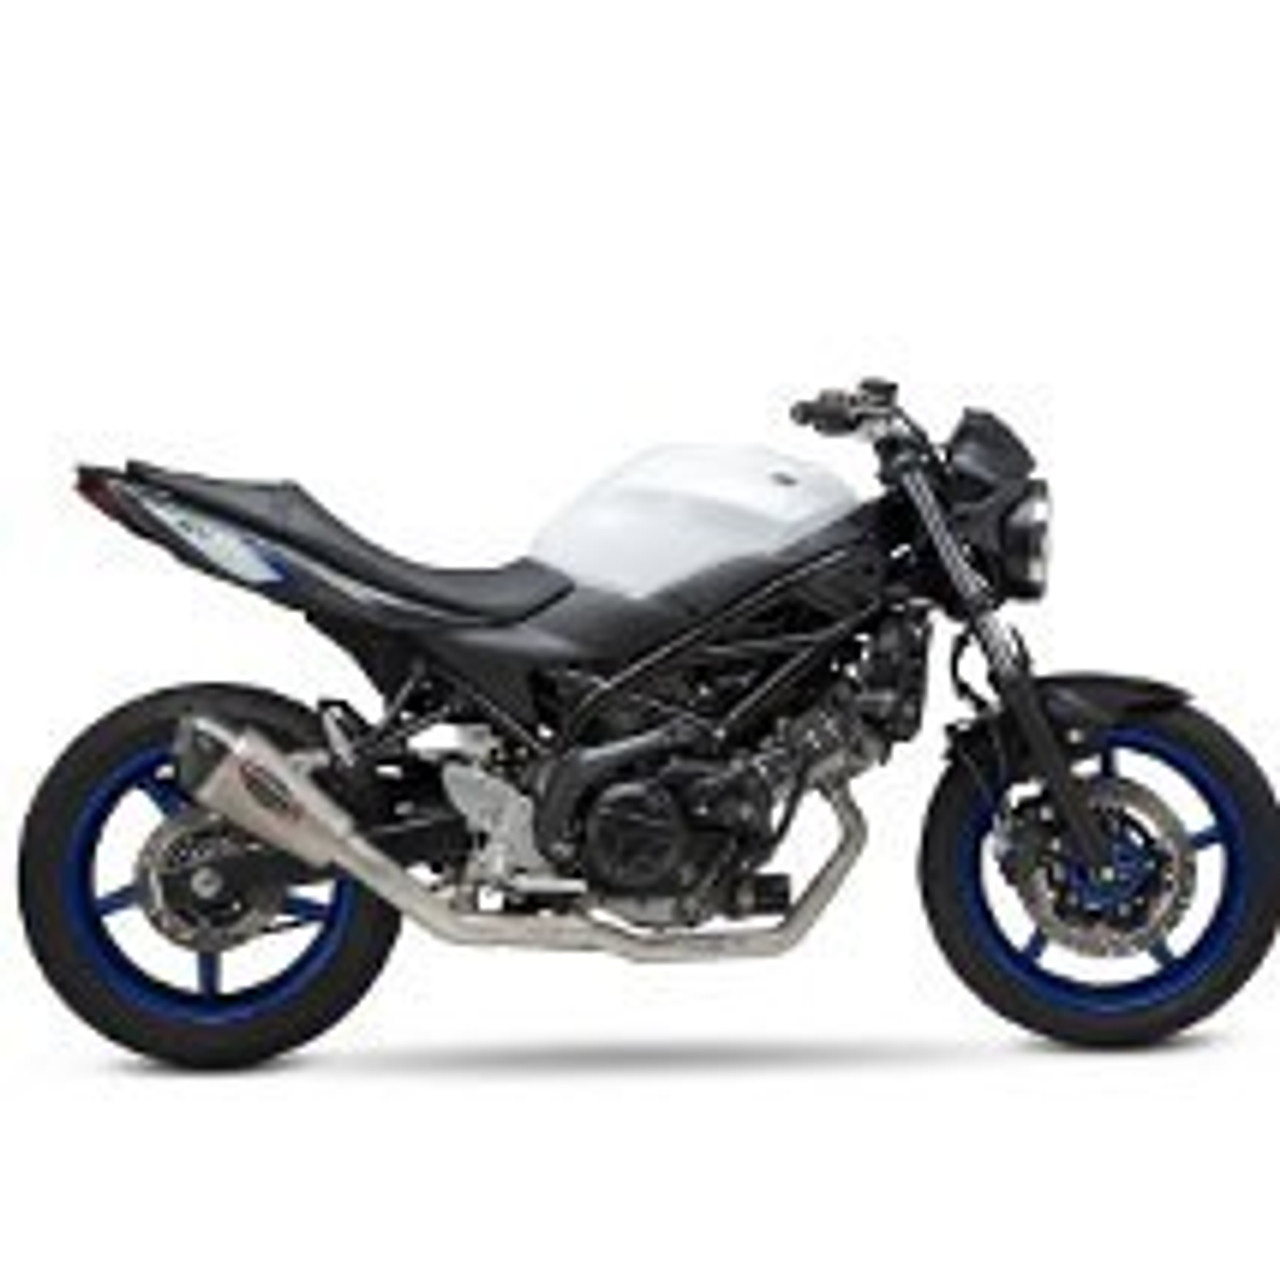 Yoshimura Alpha T Full System Exhaust with Stainless Muffler for Suzuki SV650A ABS 17-19